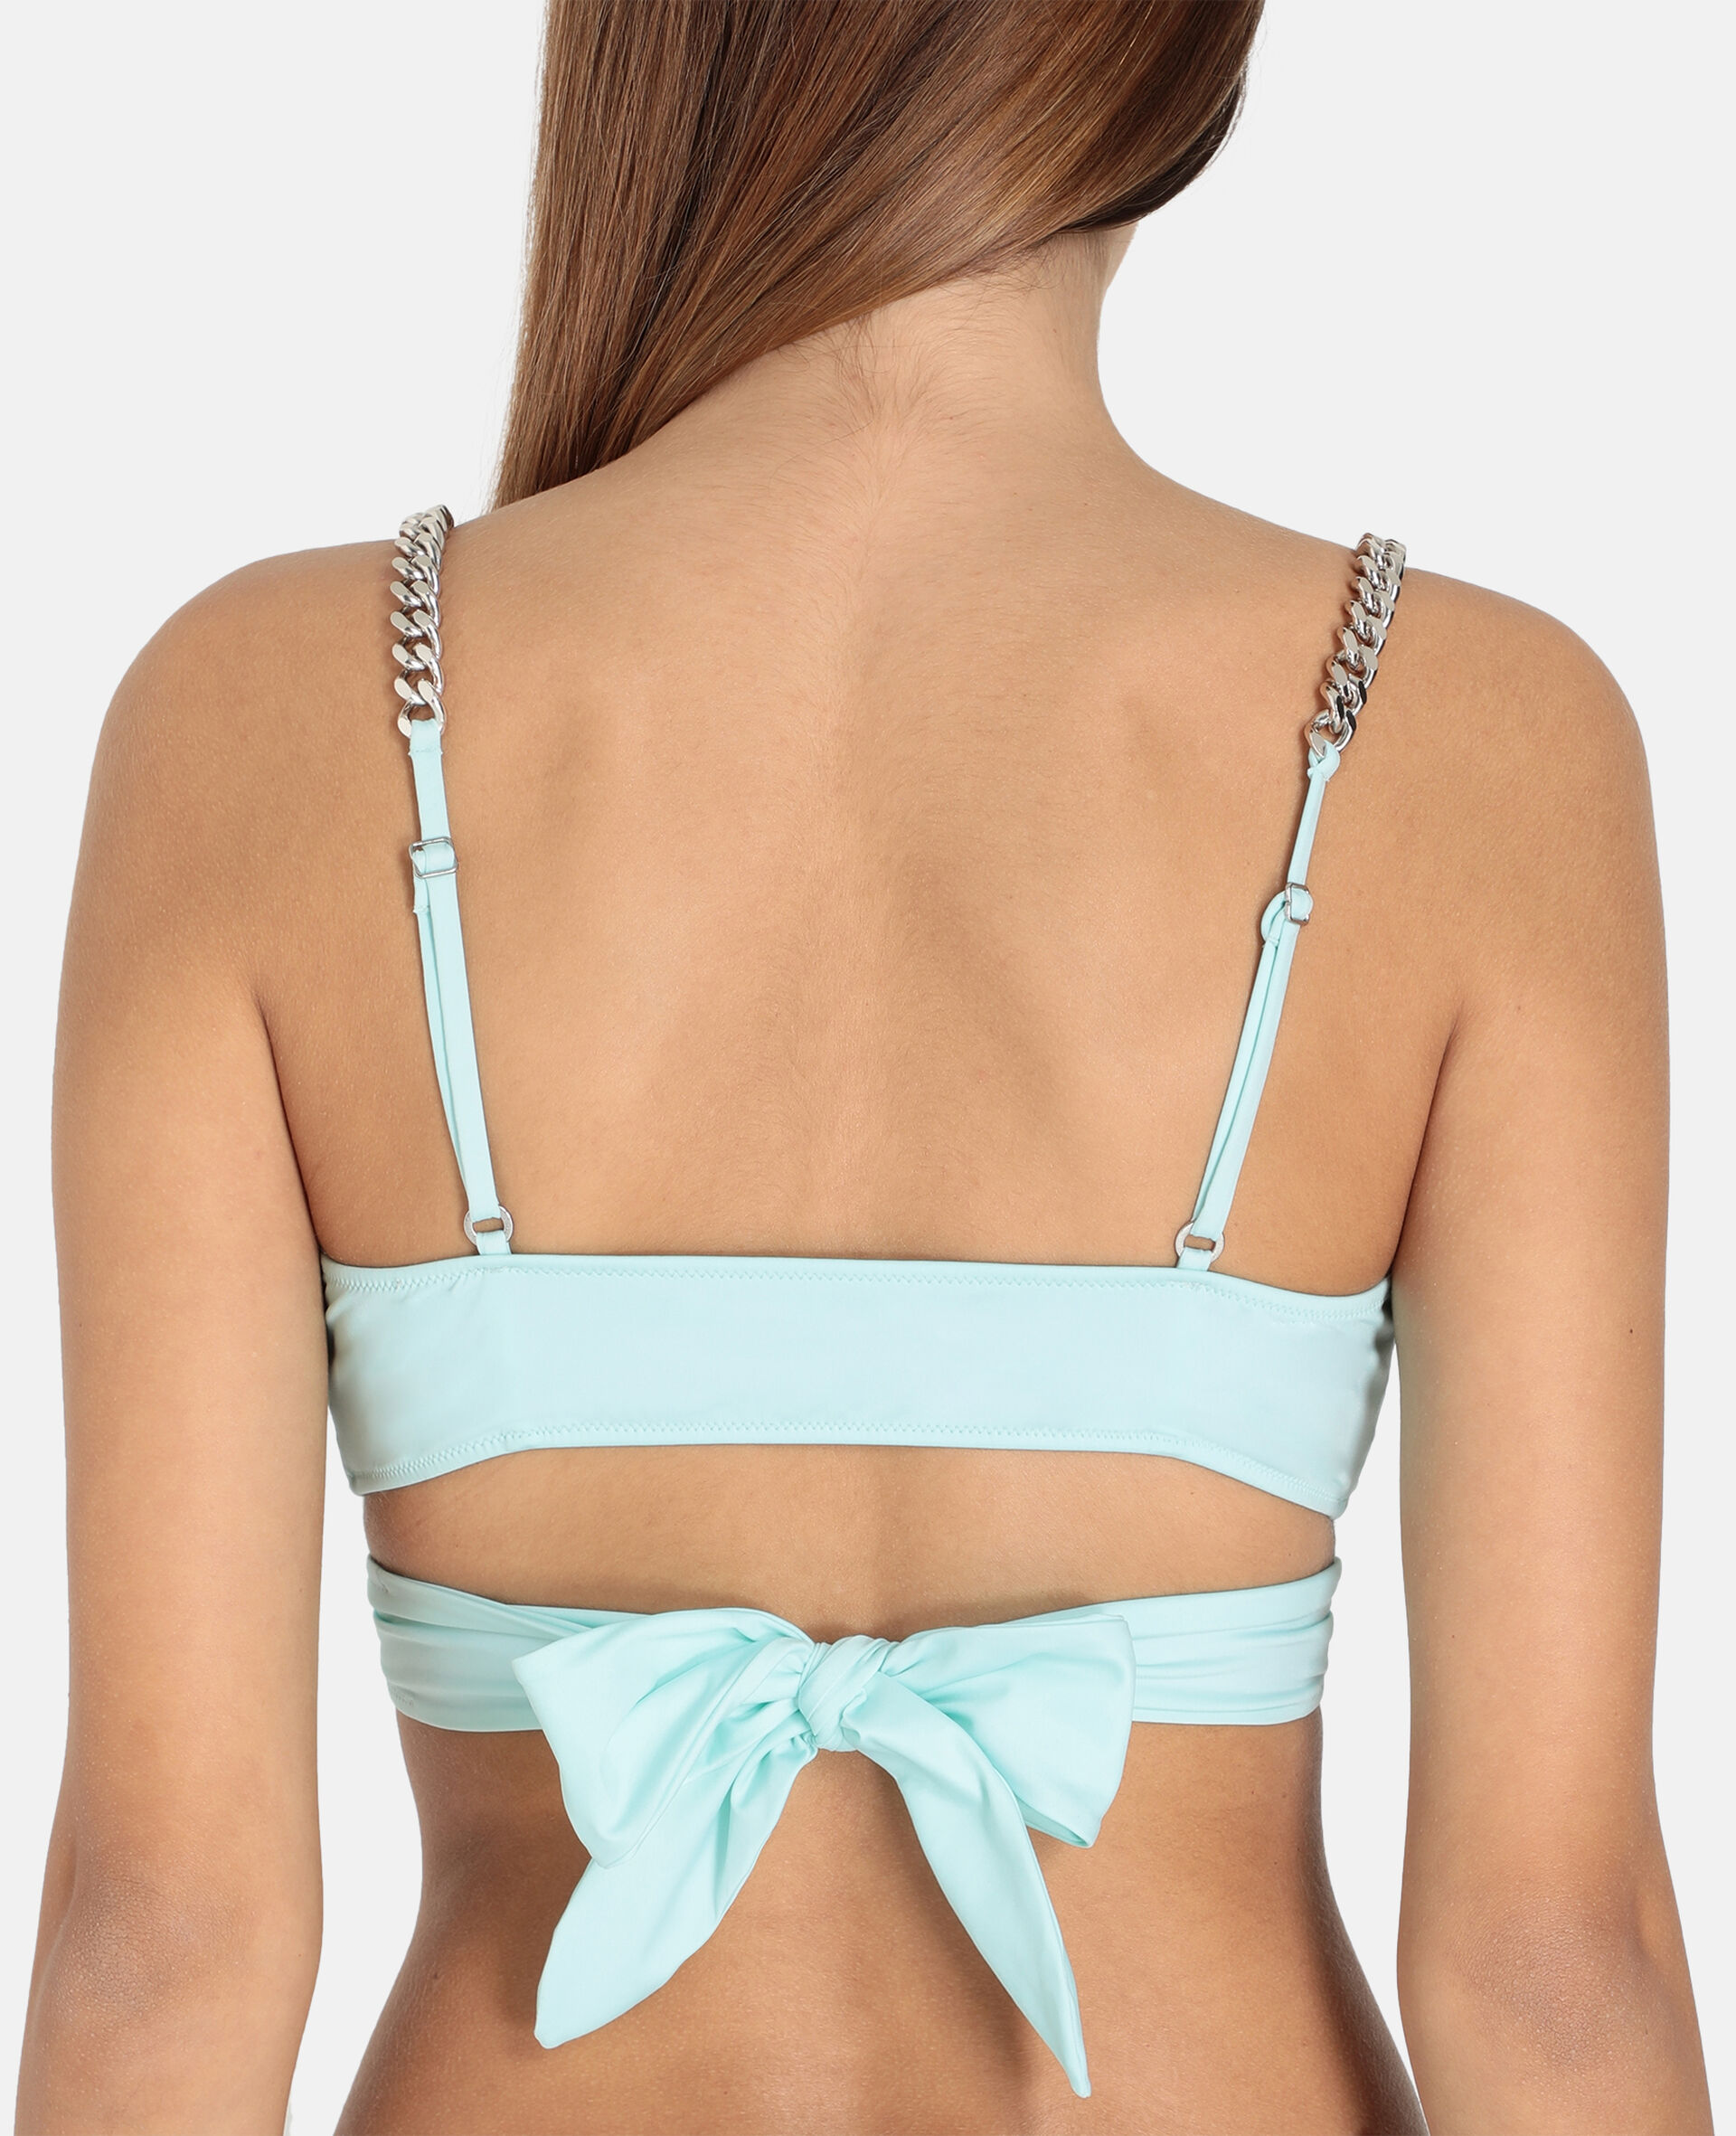 Iconic Chain Wrap Top-Mint-large image number 2